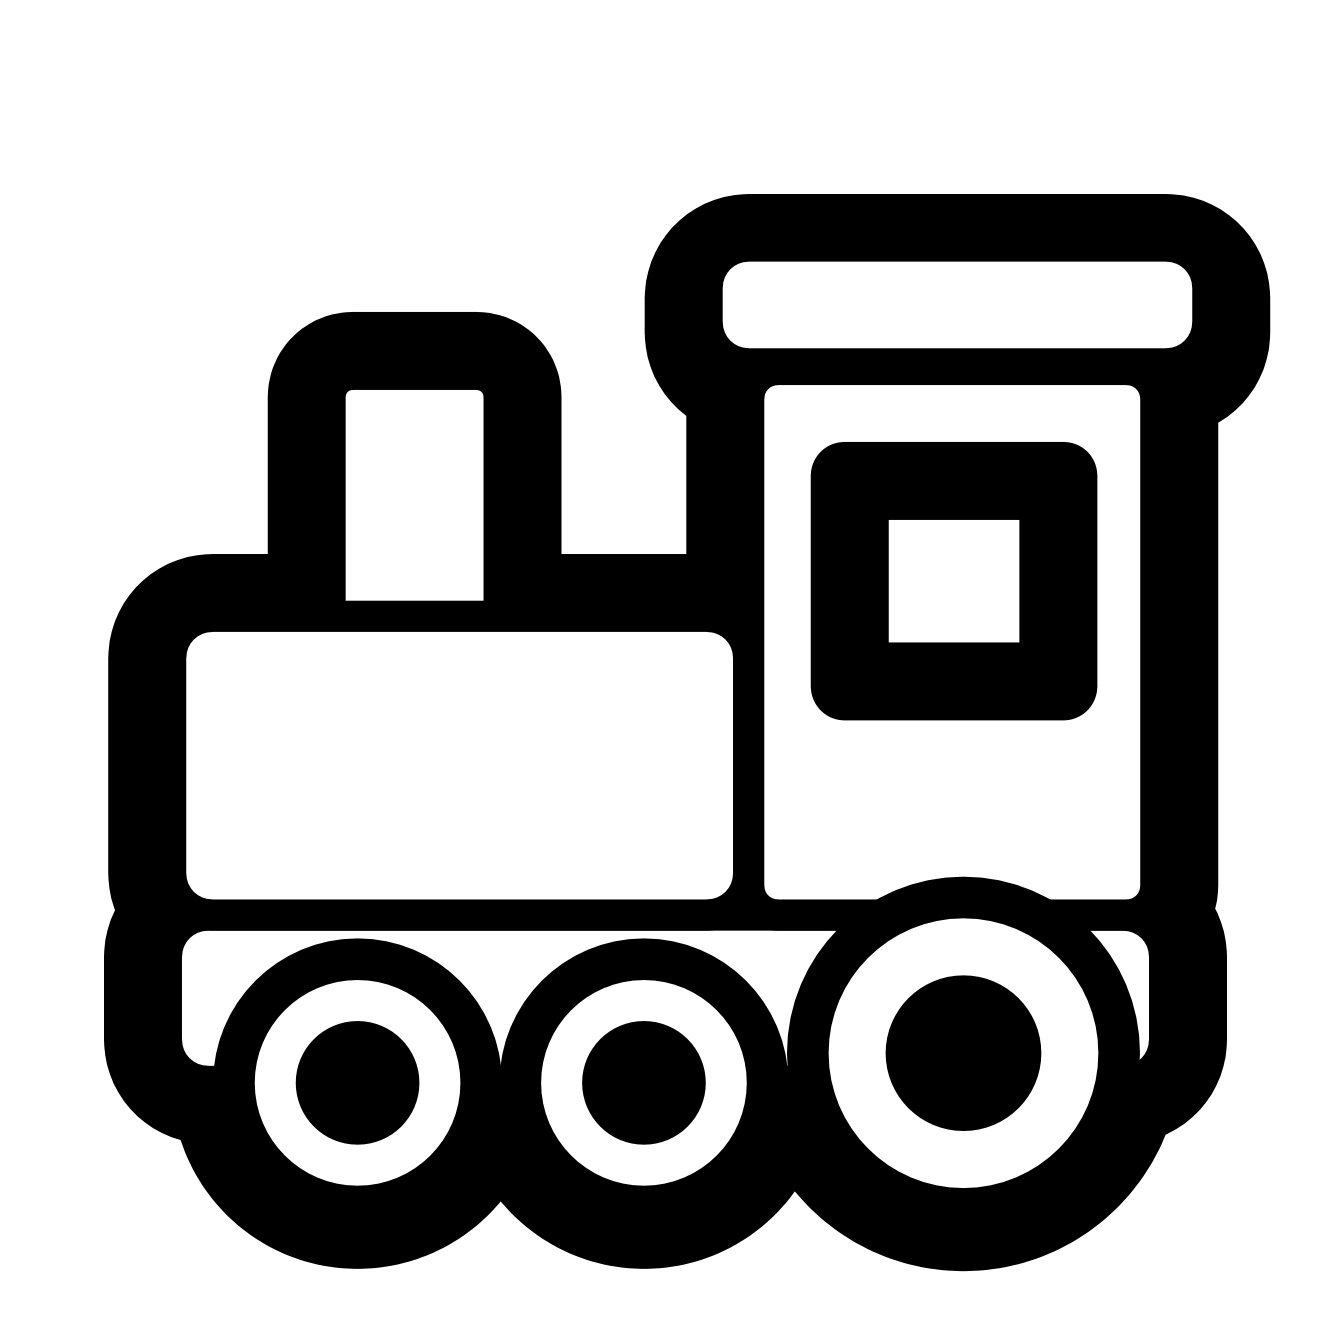 Toy Train Images - ClipArt | Clipart Panda - Free Clipart Images